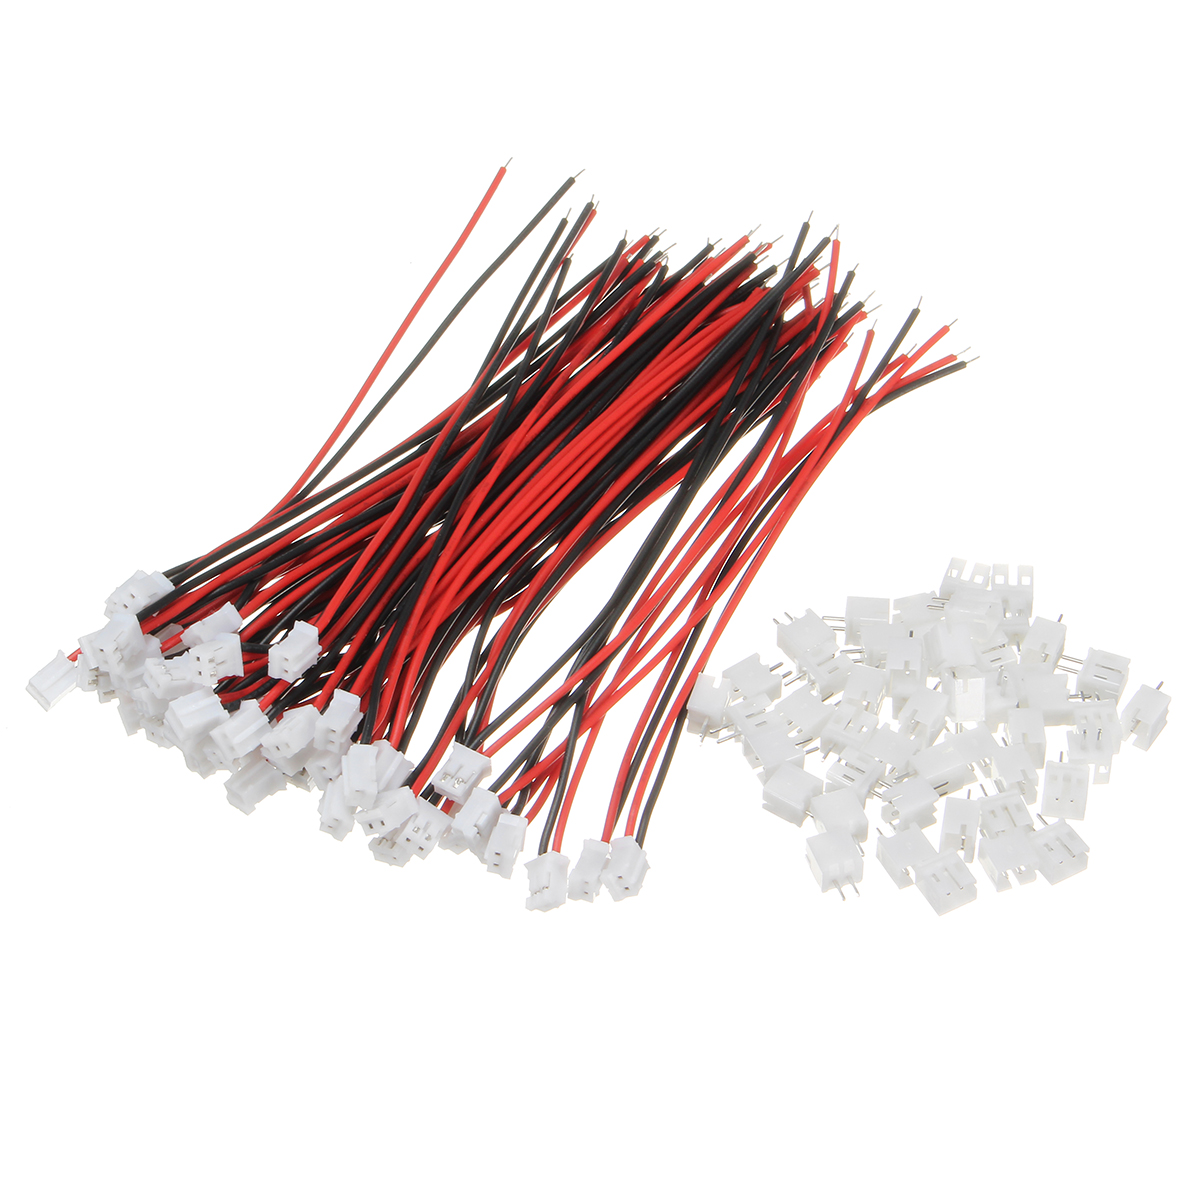 Excellwayreg-100Pcs-Mini-Micro-JST-20-PH-2Pin-Connector-Plug-With-120mm-Wires-Cables-1147298-1